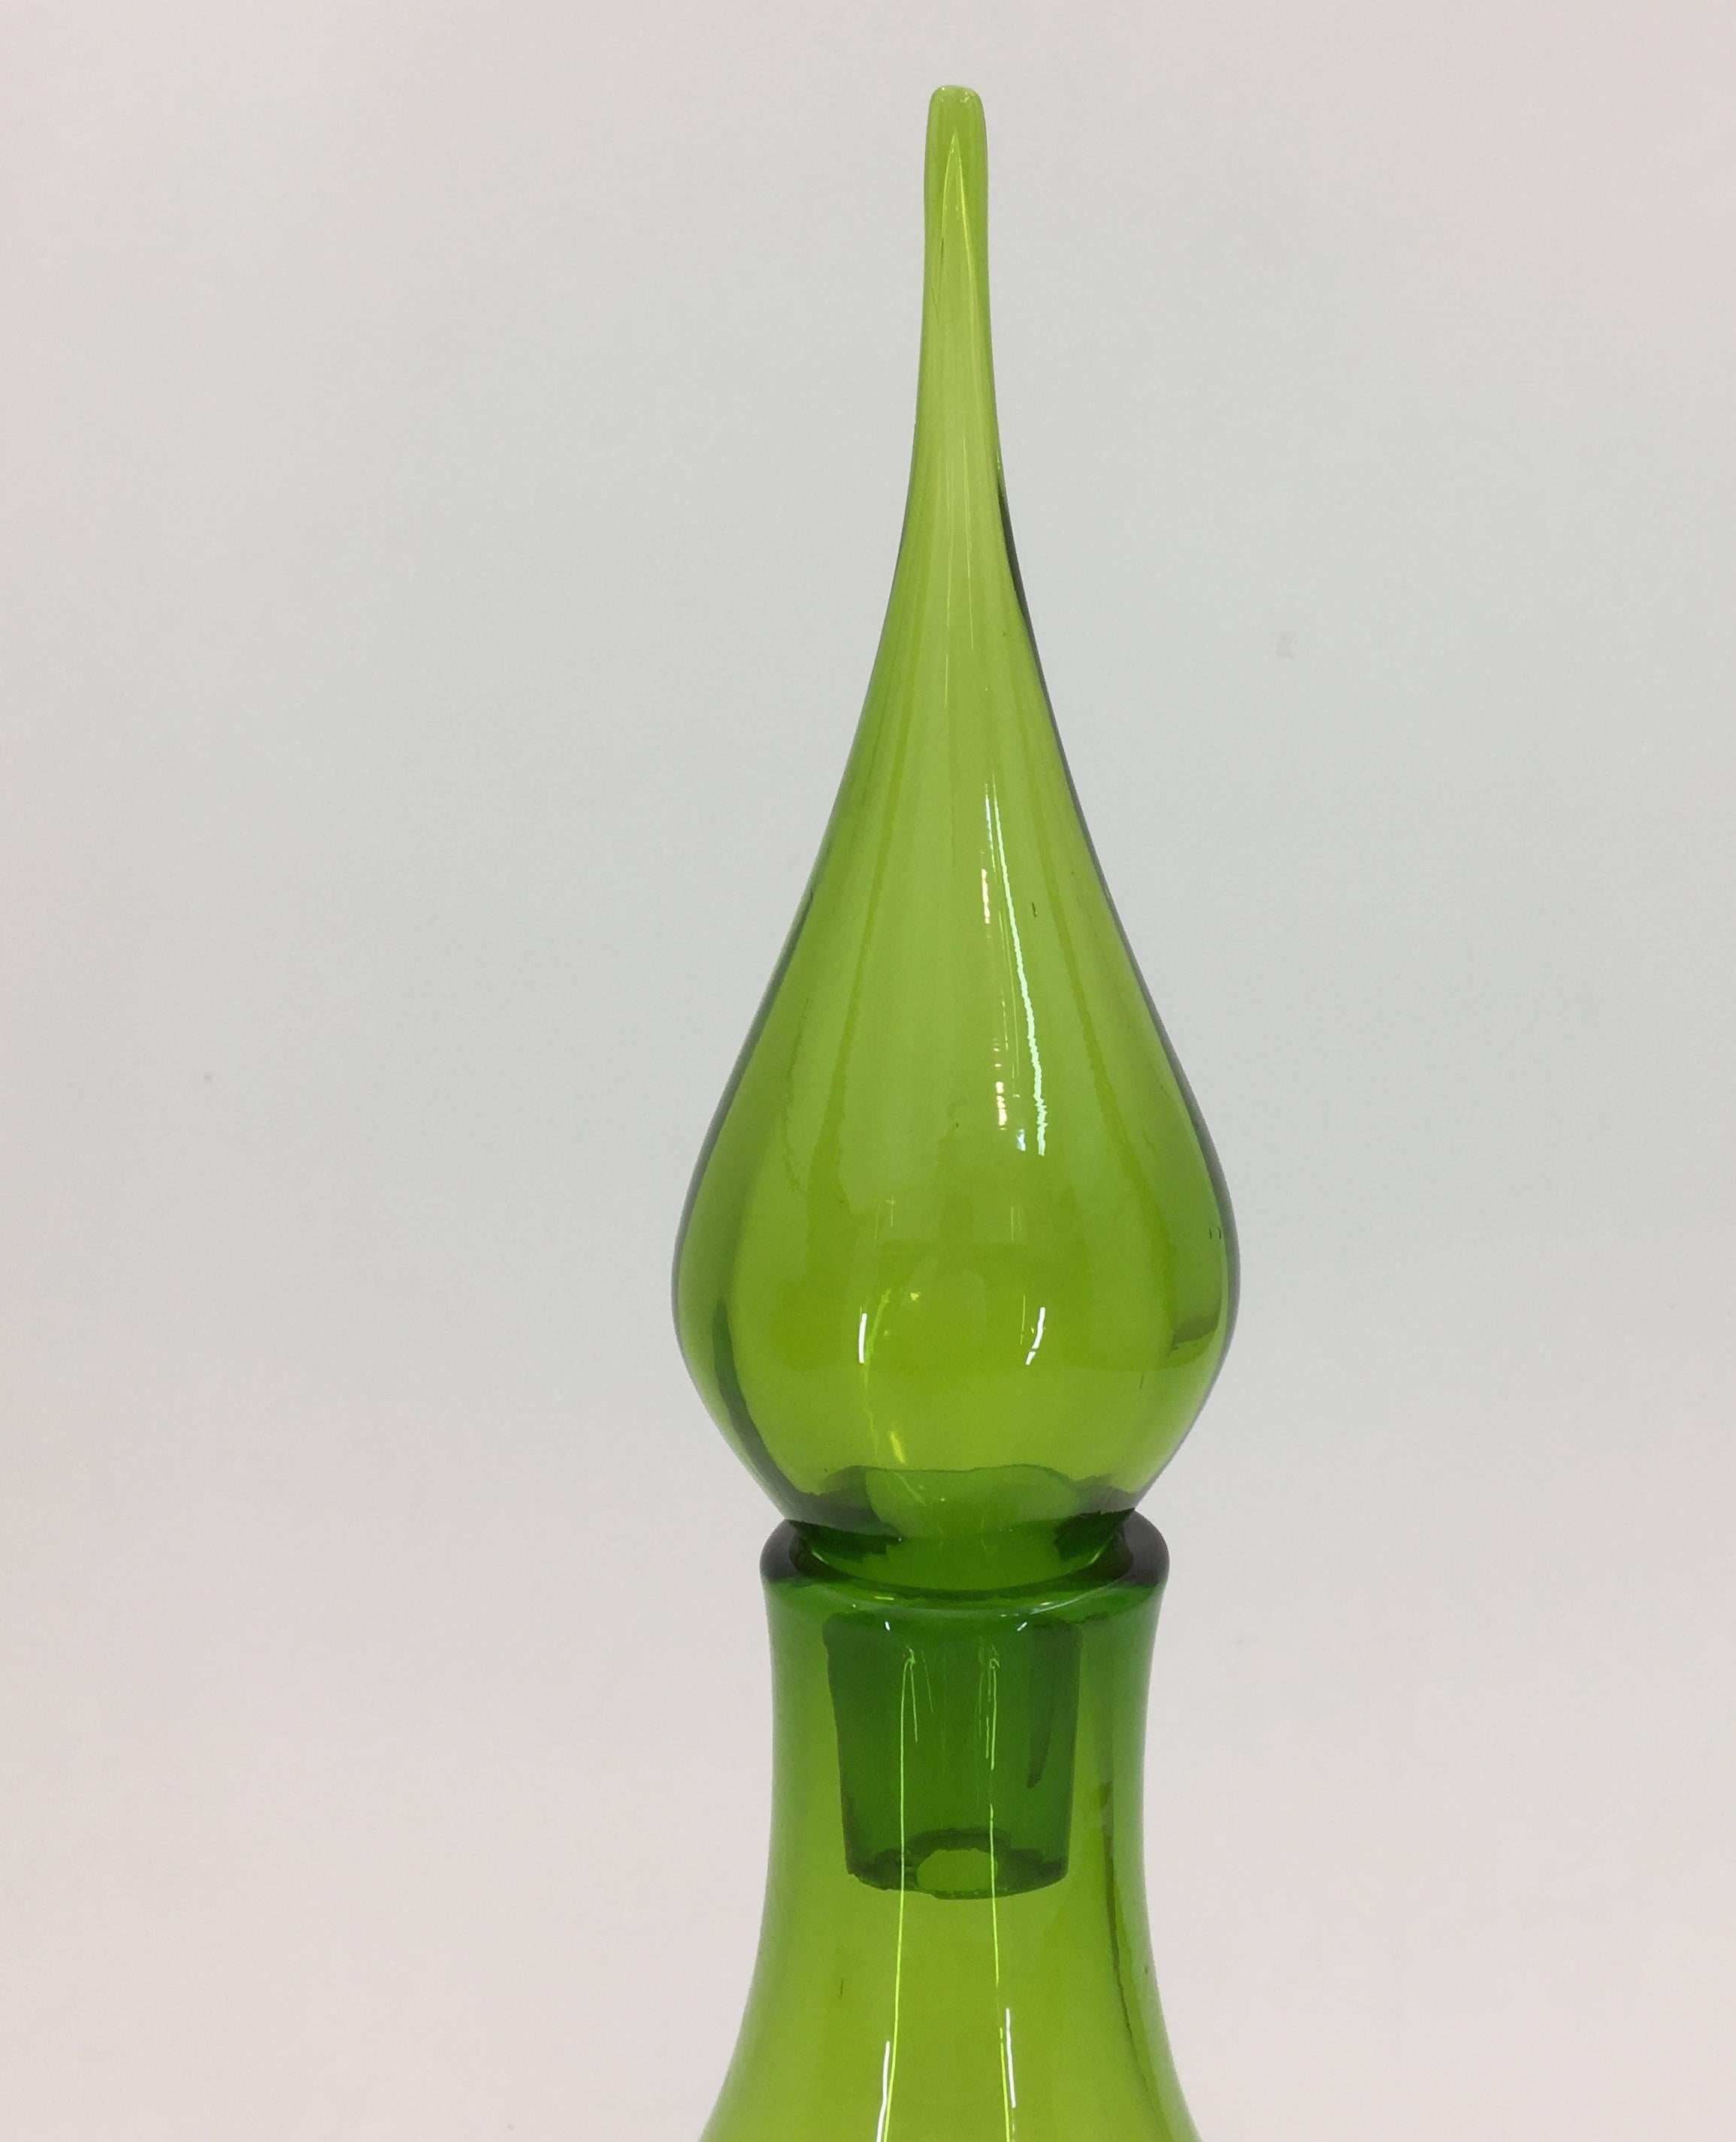 North American Monumental Decanter by John Nickerson for Blenko, 1972